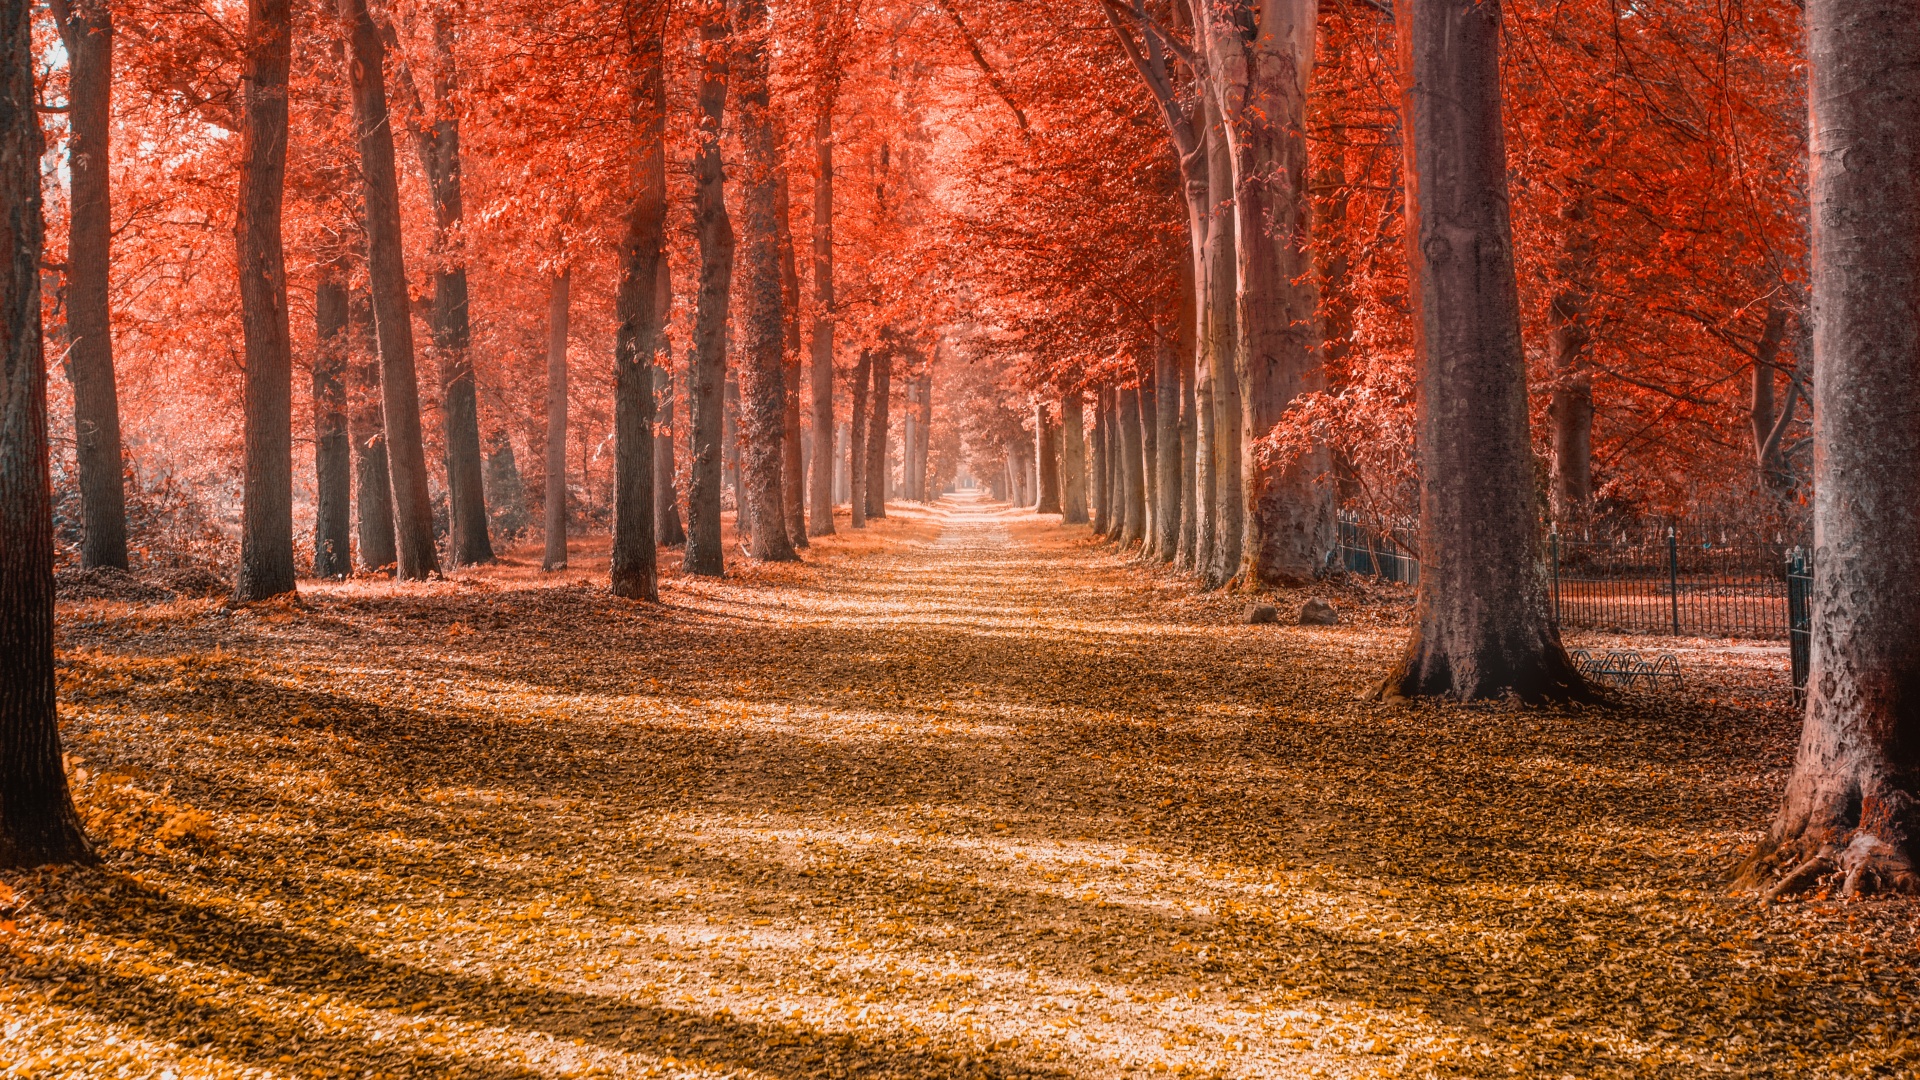 Autumn trees, Forest path, Trunks, Woods, Autumn leaves, Red, Fallen Leaves...